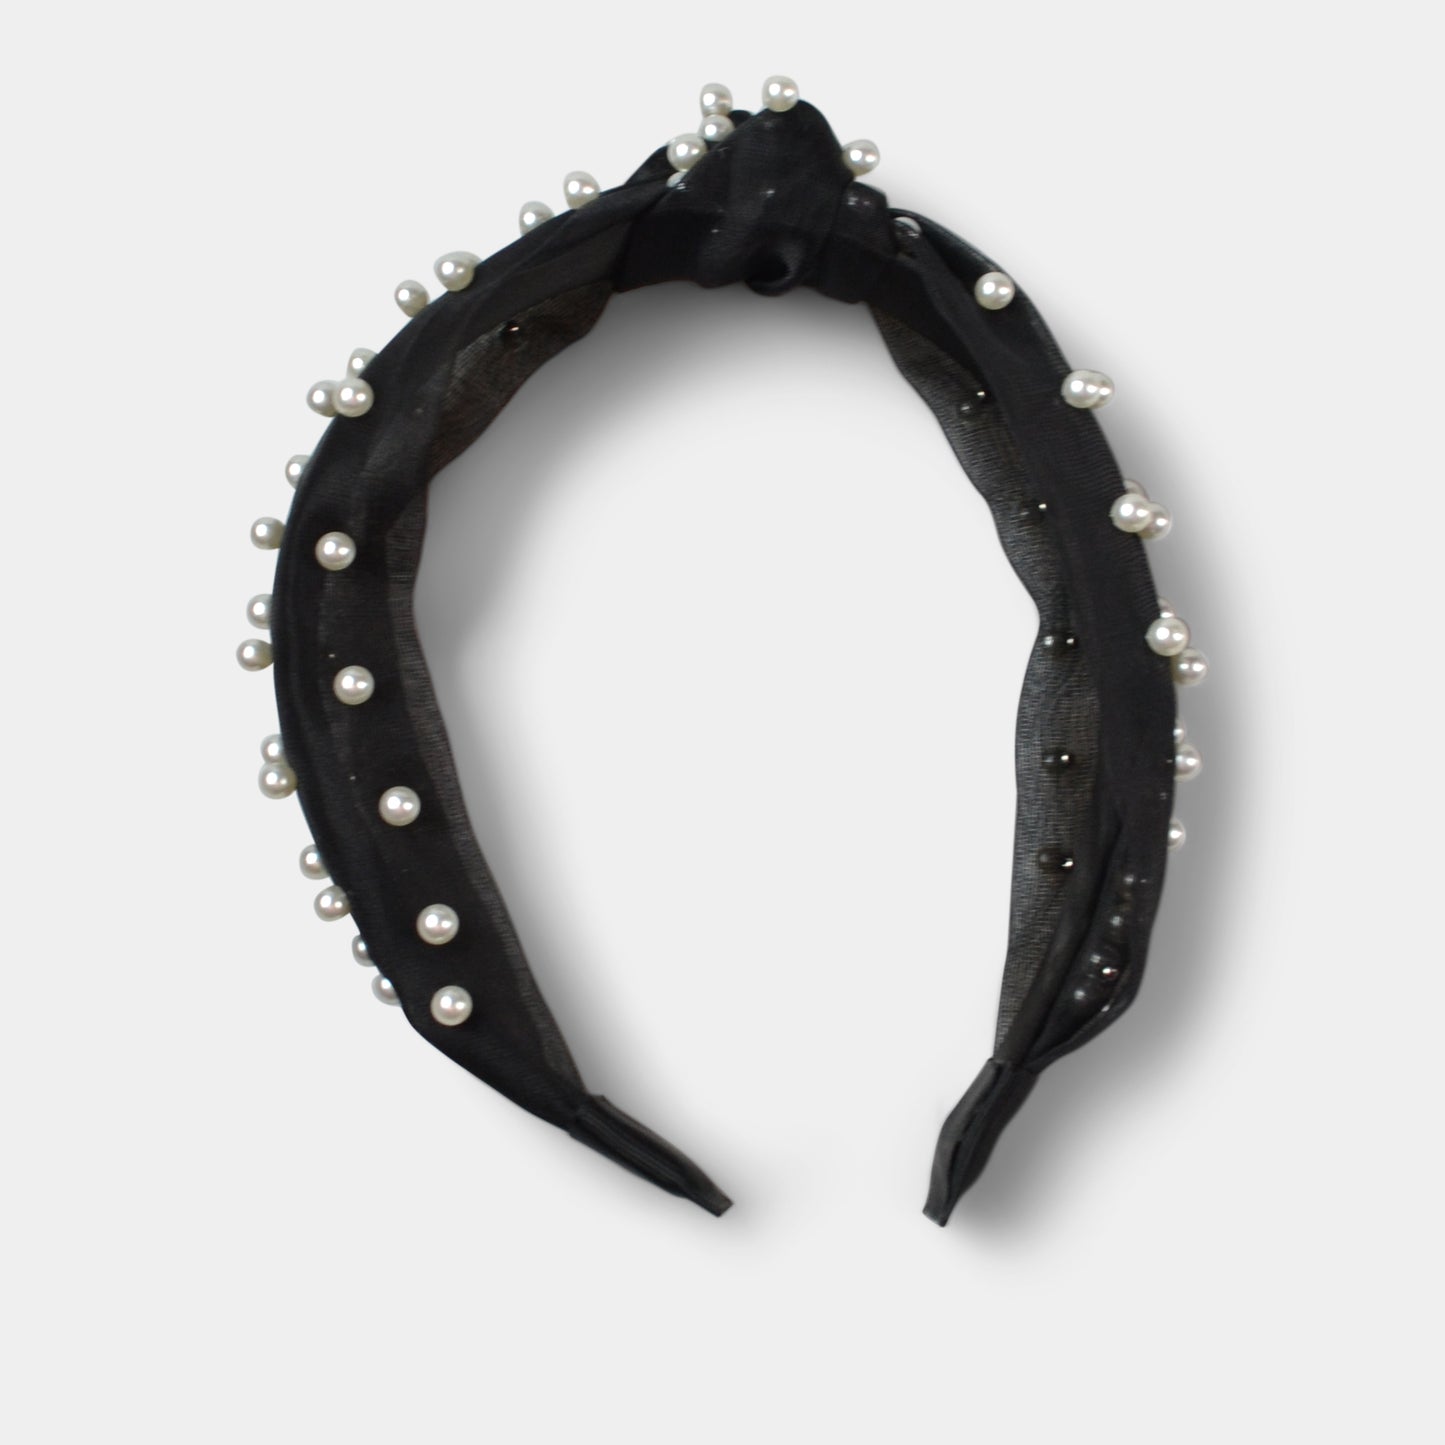 FASHION BY A STEP ABOVE HEADBAND IN BLACK WITH PEARLS